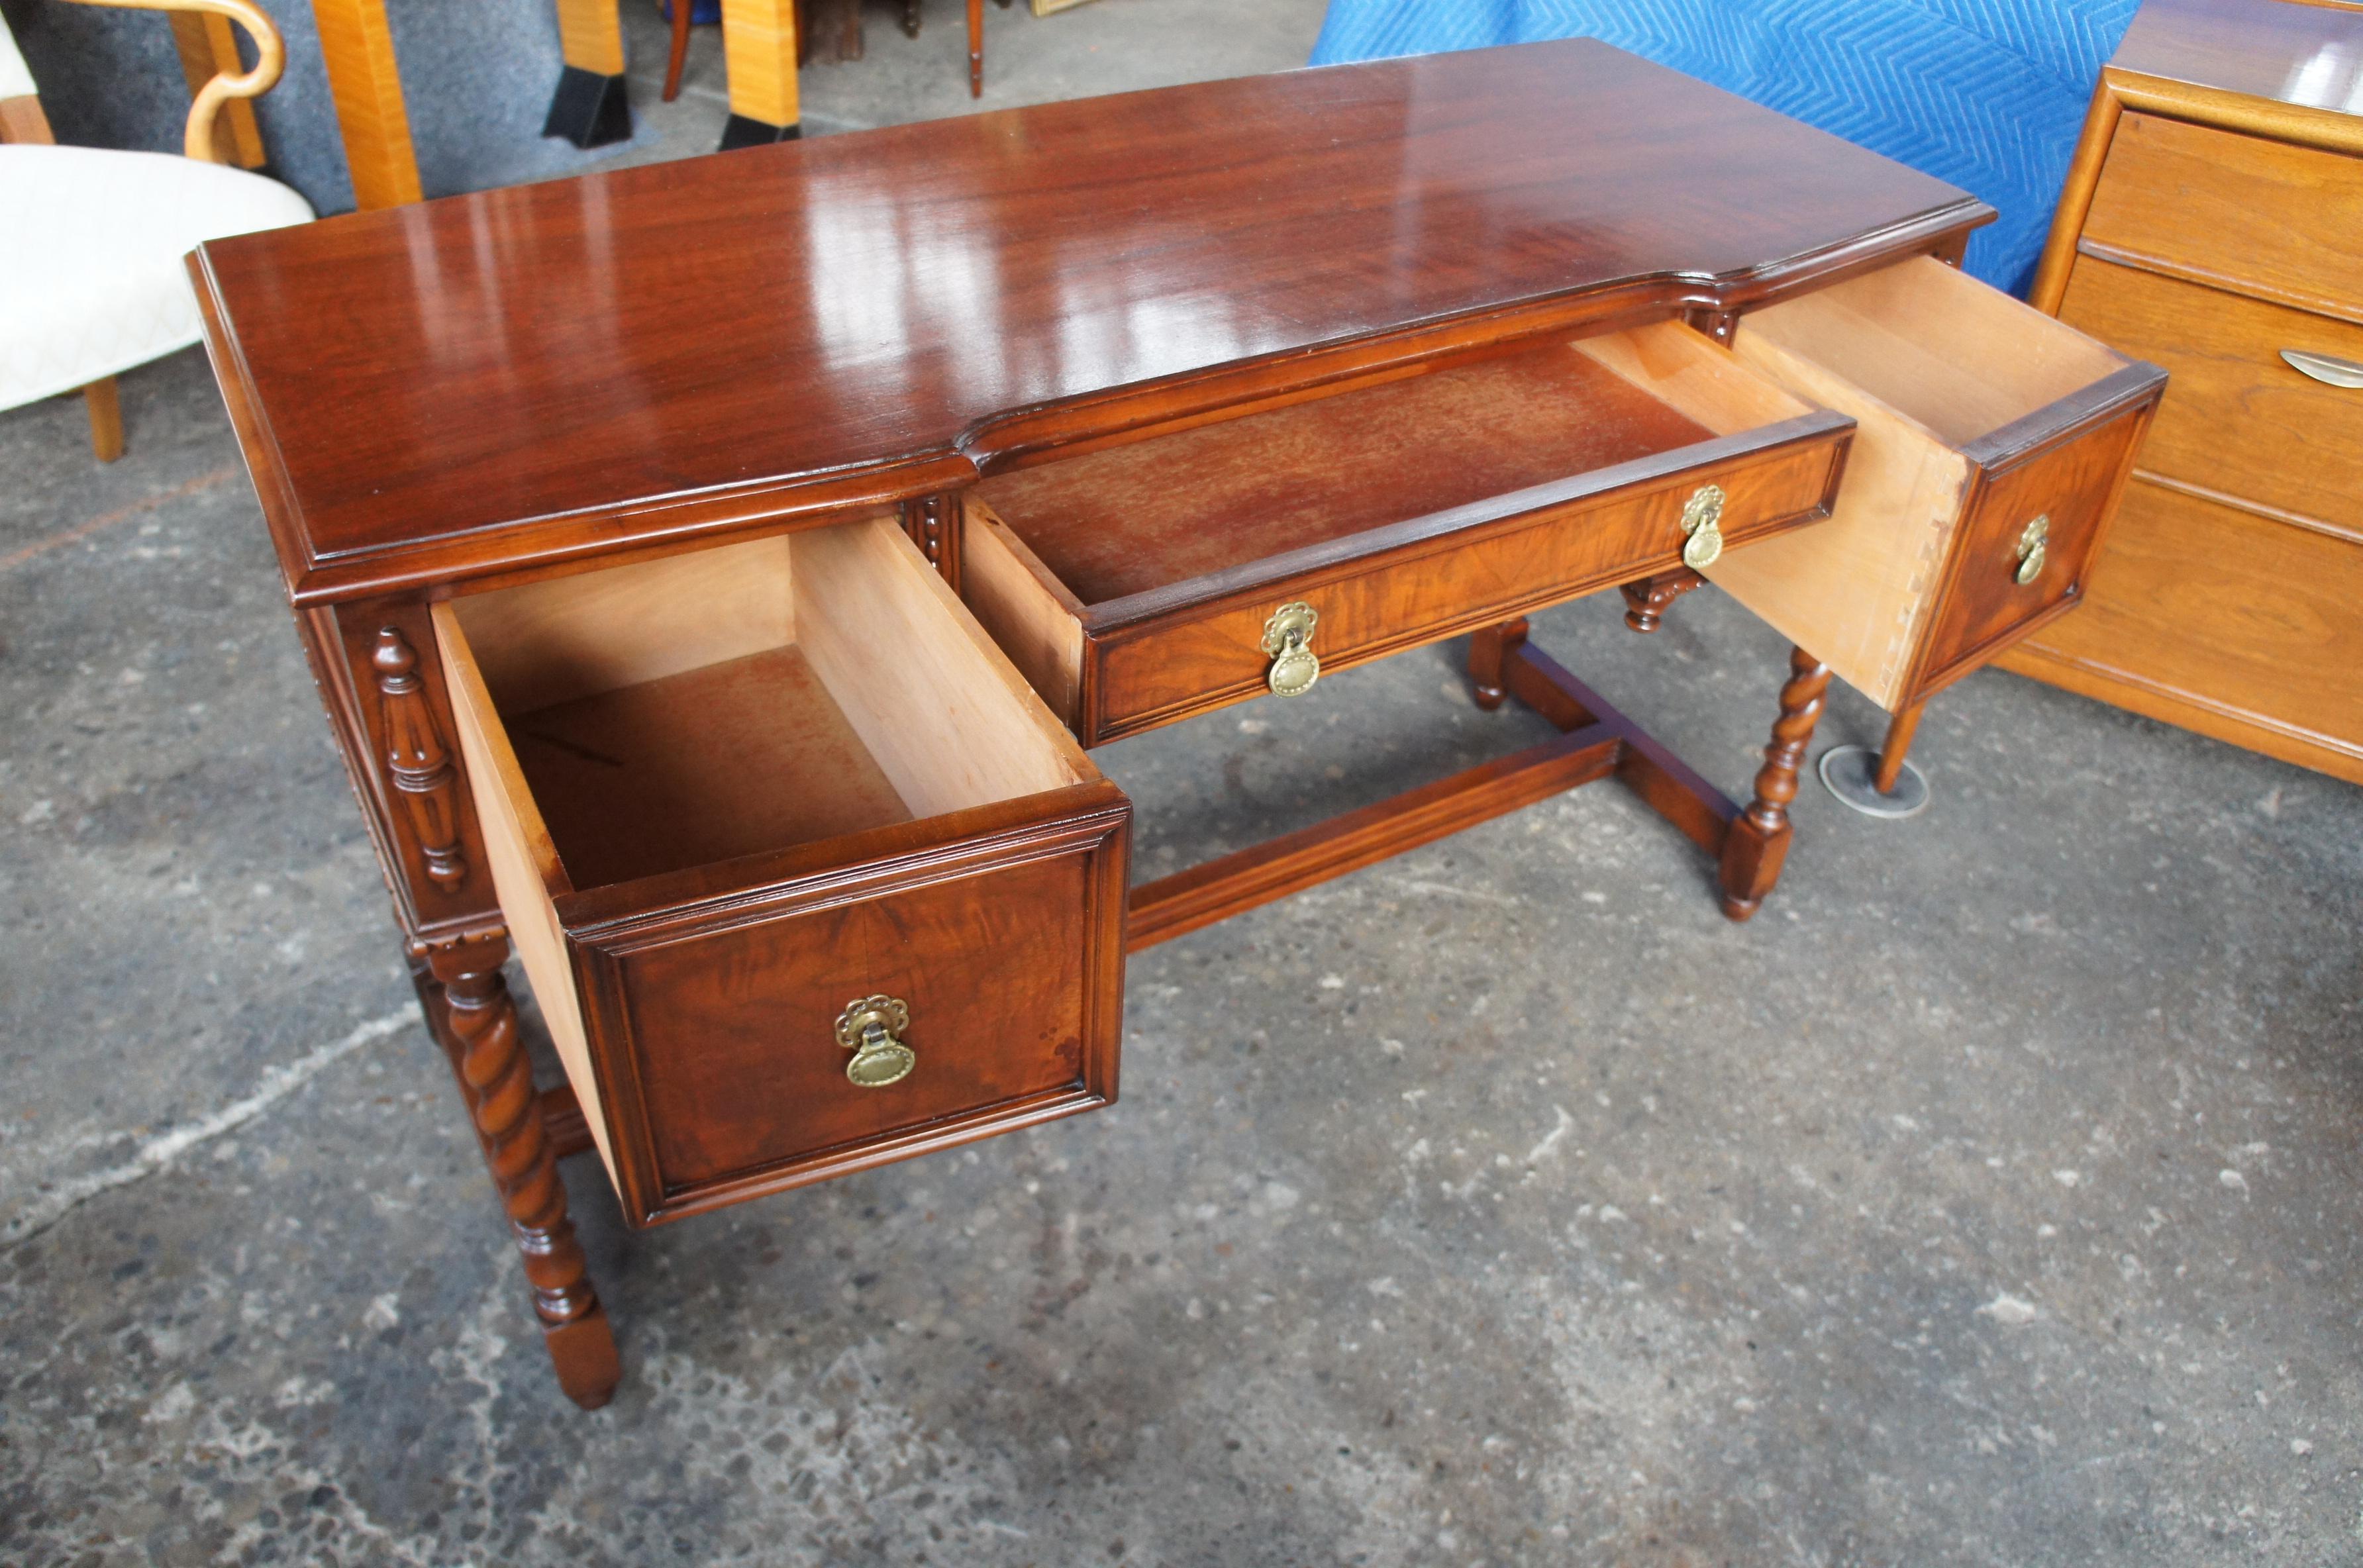 20th Century Robert Irwin Antique Jacobean Revival Walnut Dressing Table & Mirror with Bench